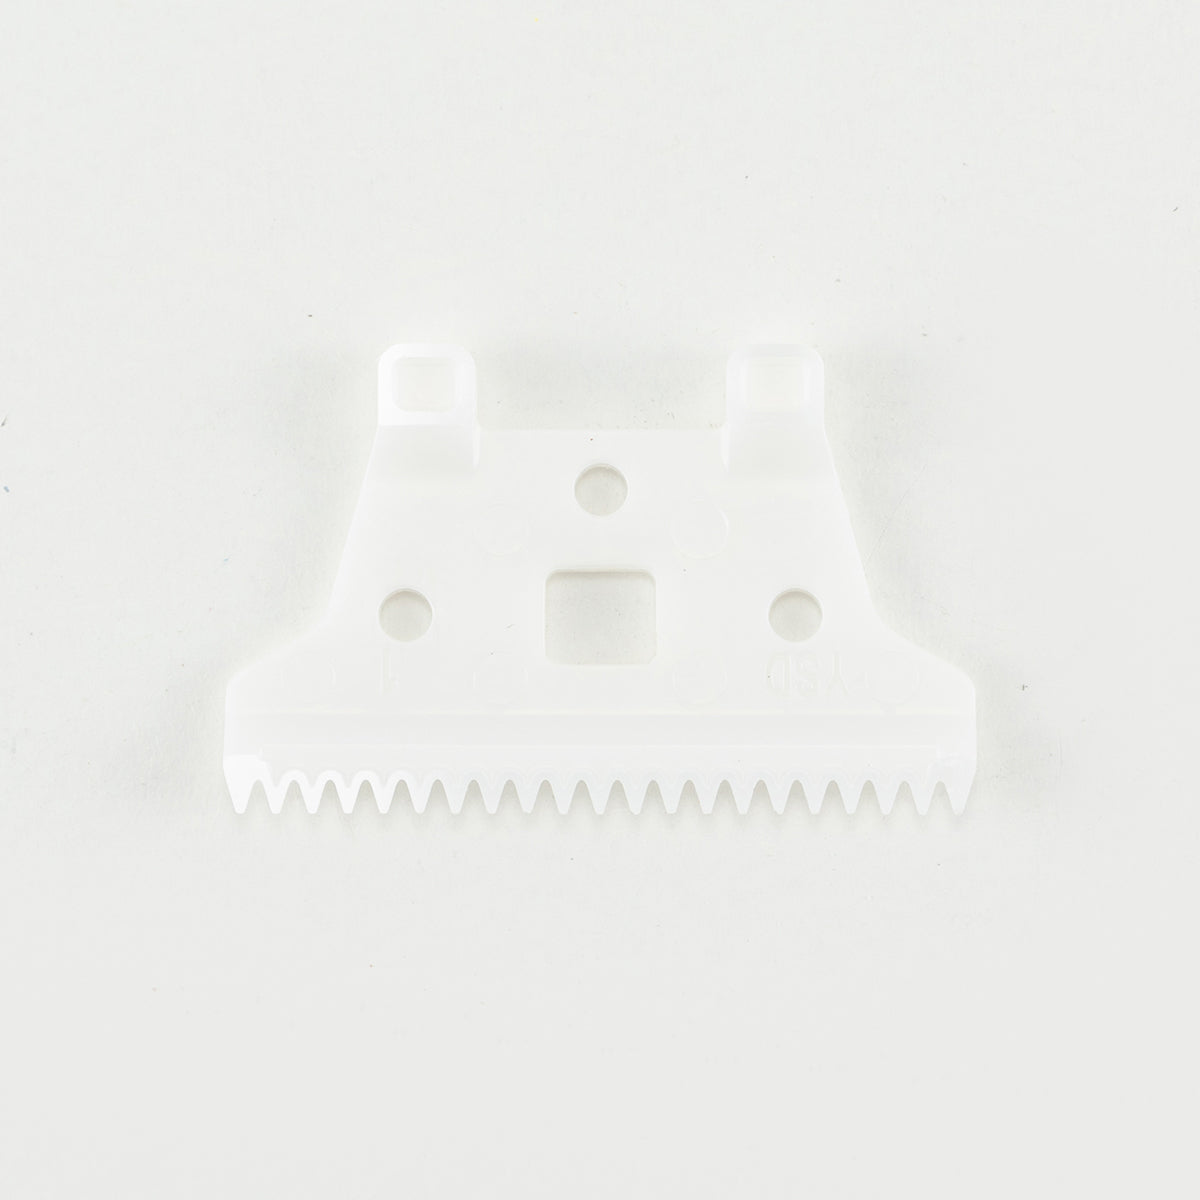 back view of zirconia trimmer blade replacement 21 teeth